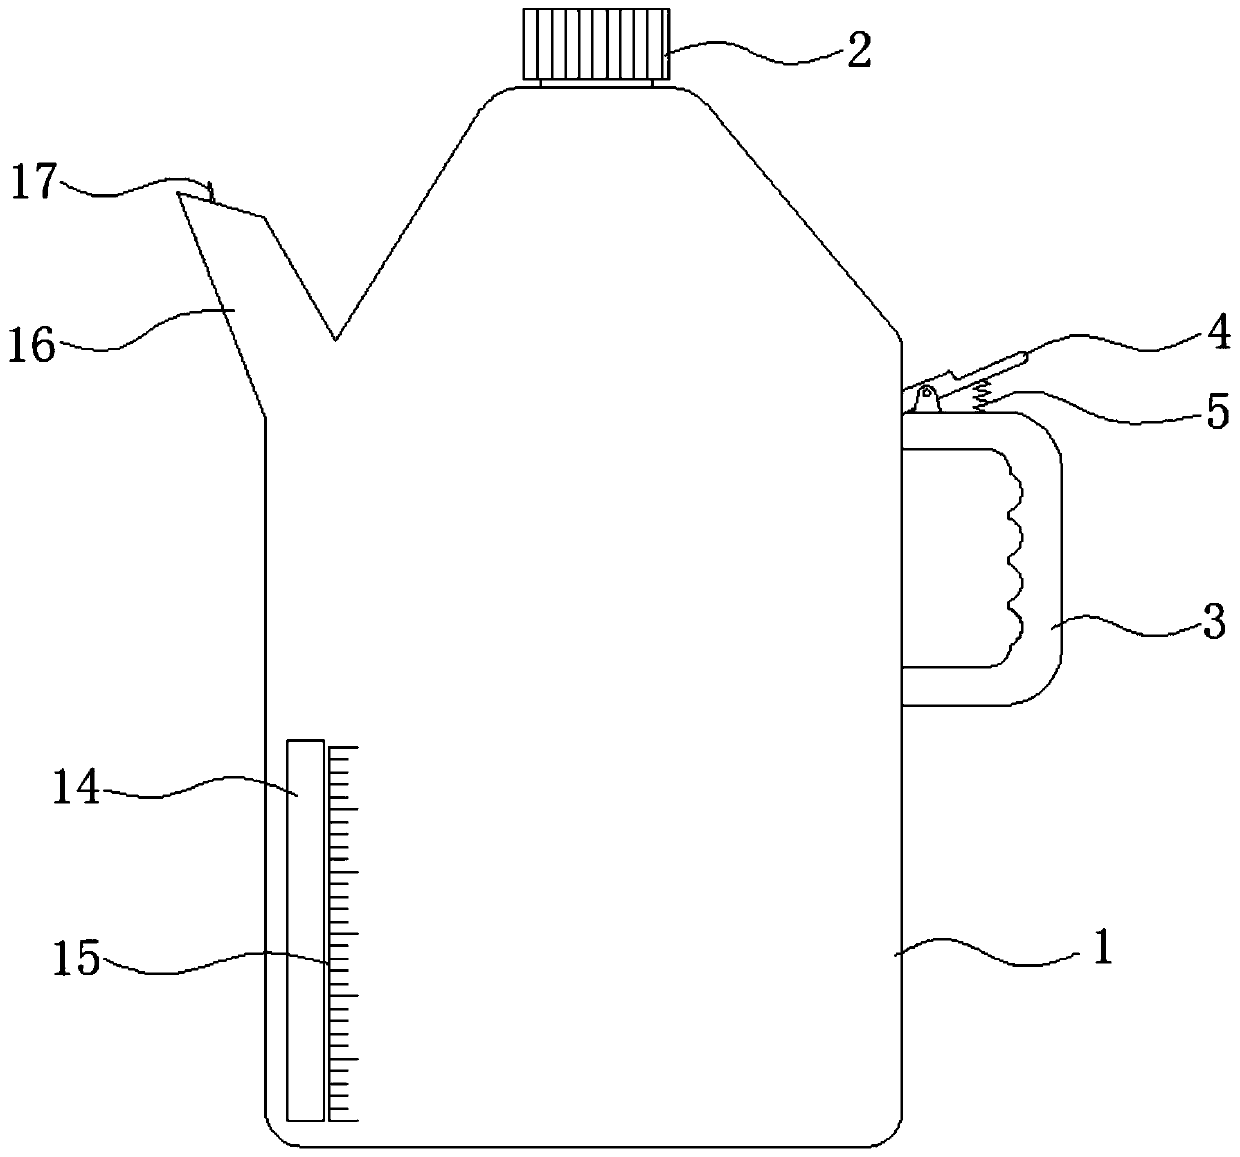 Edible oil containing device capable of achieving quantitative pouring